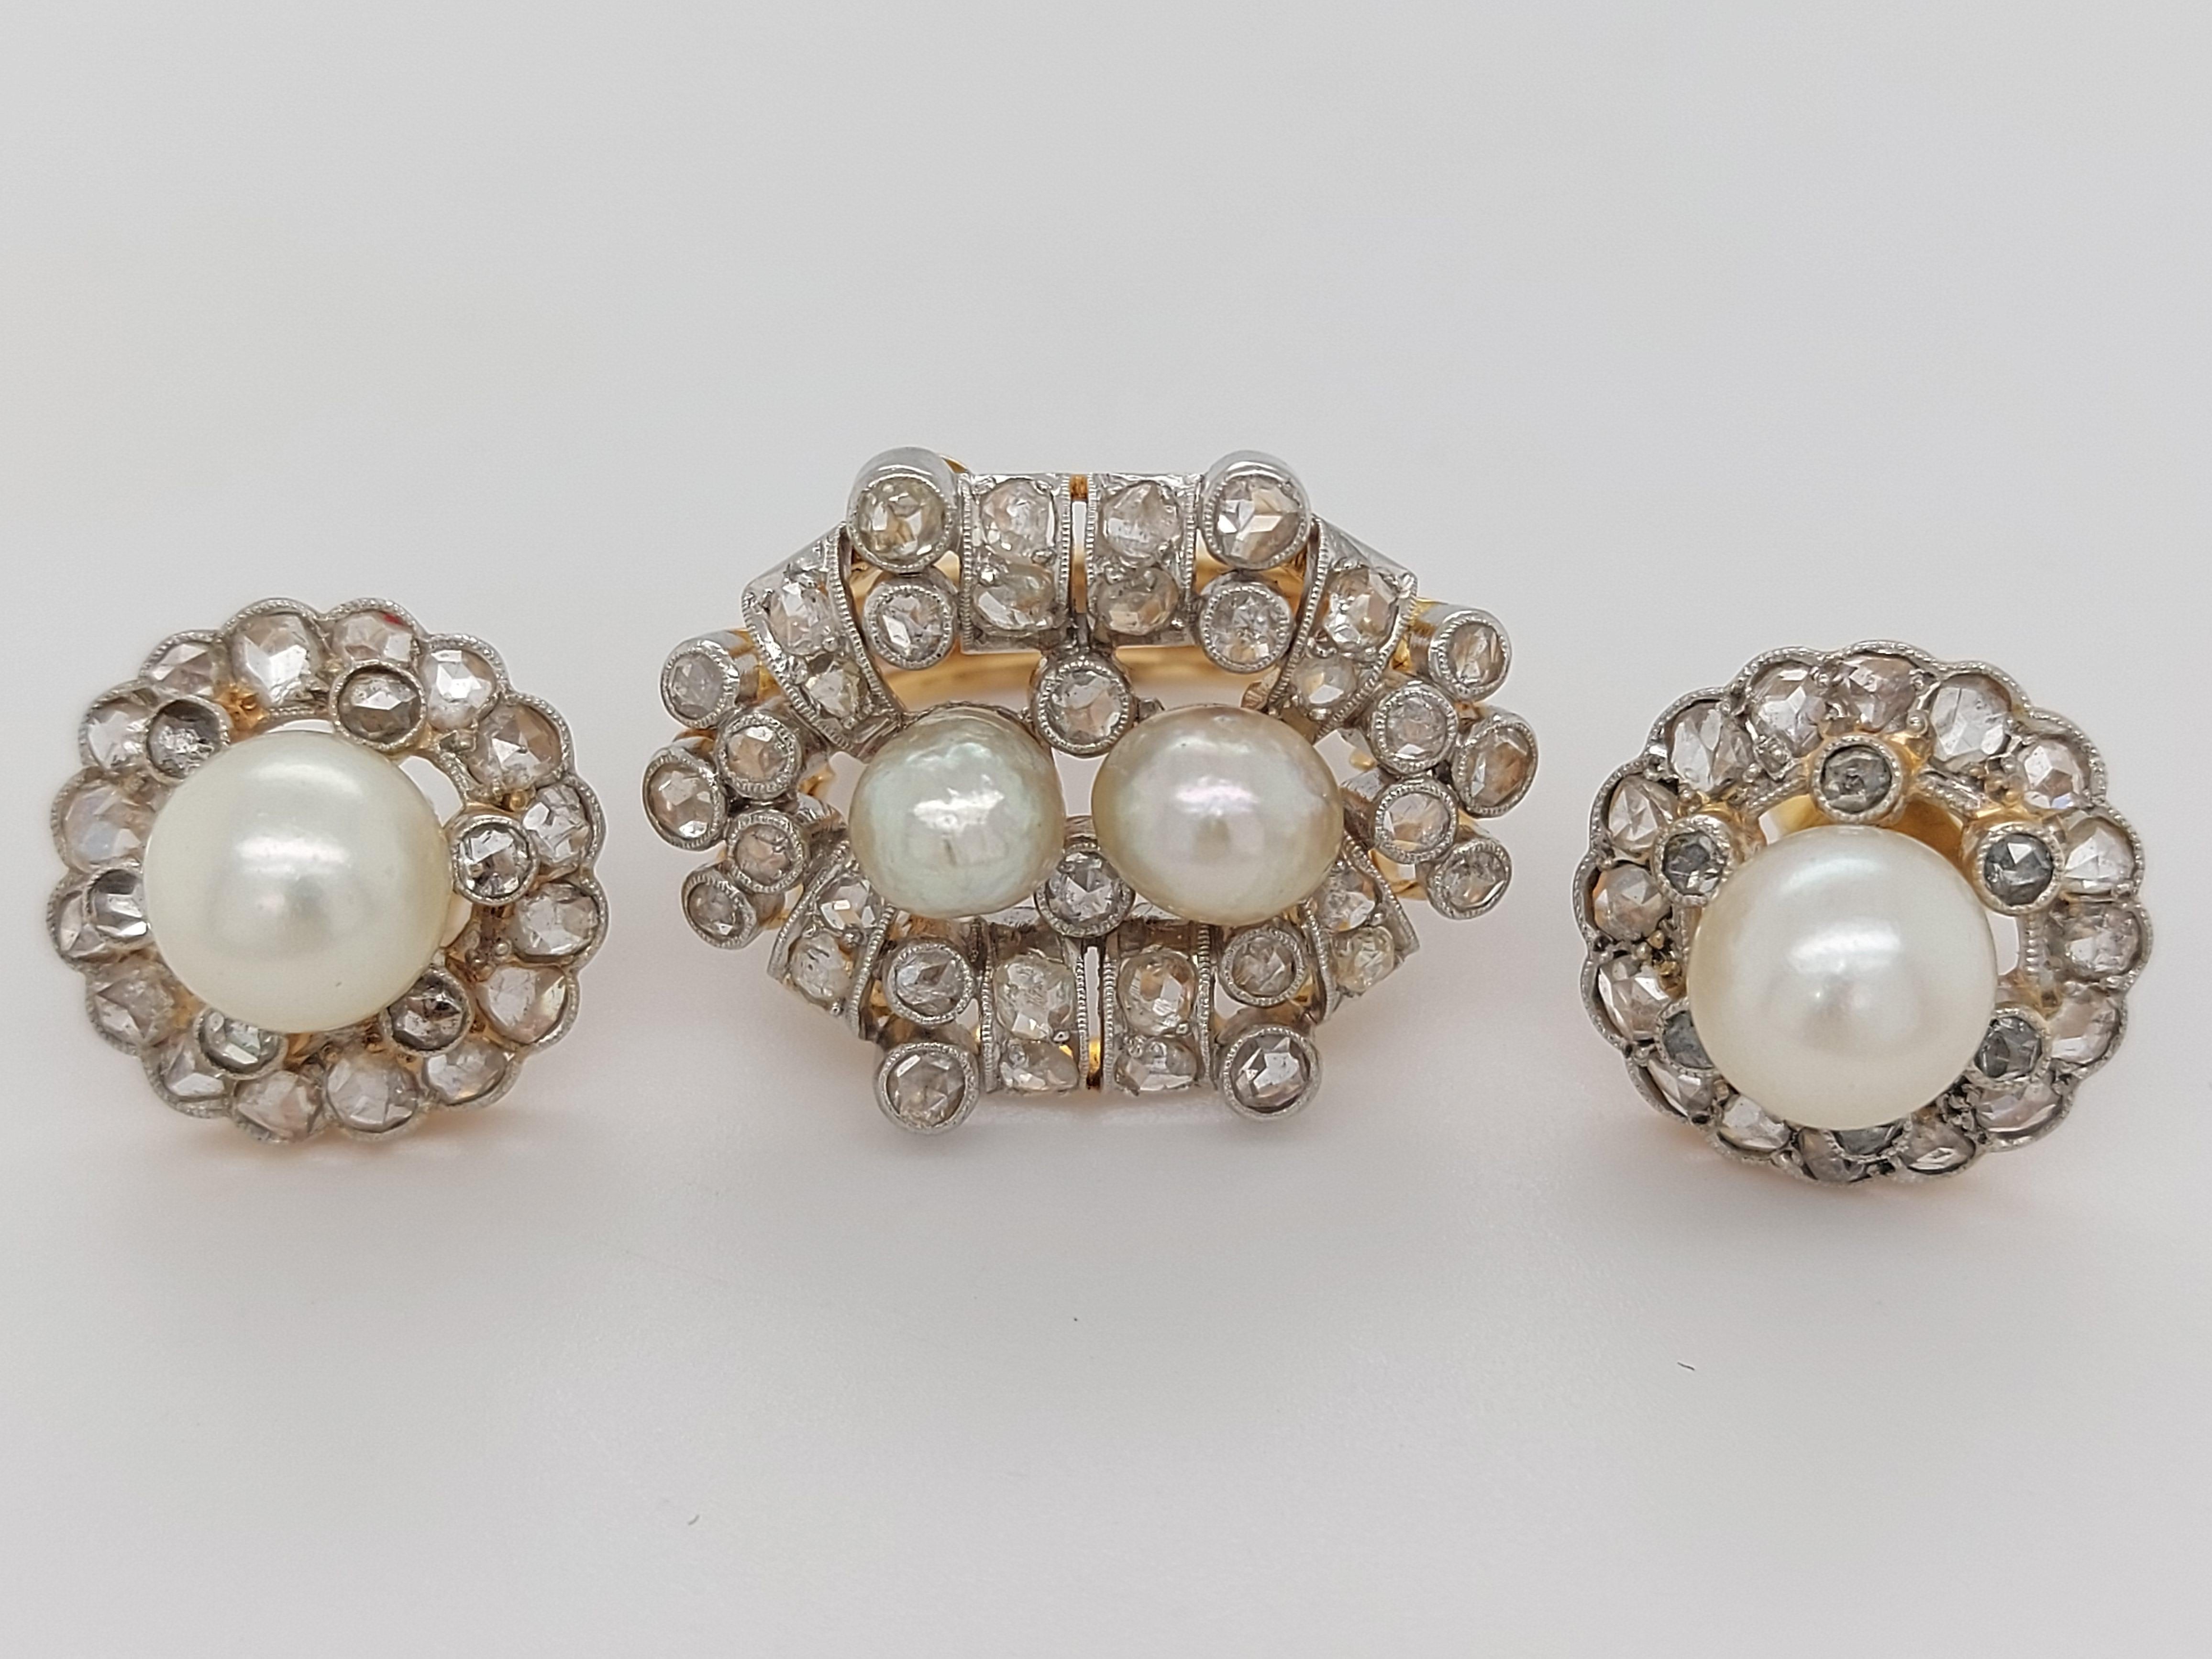 Beautiful Platinum and Gold Ring and Earrings Rose Cut Diamonds and Pearls For Sale 7